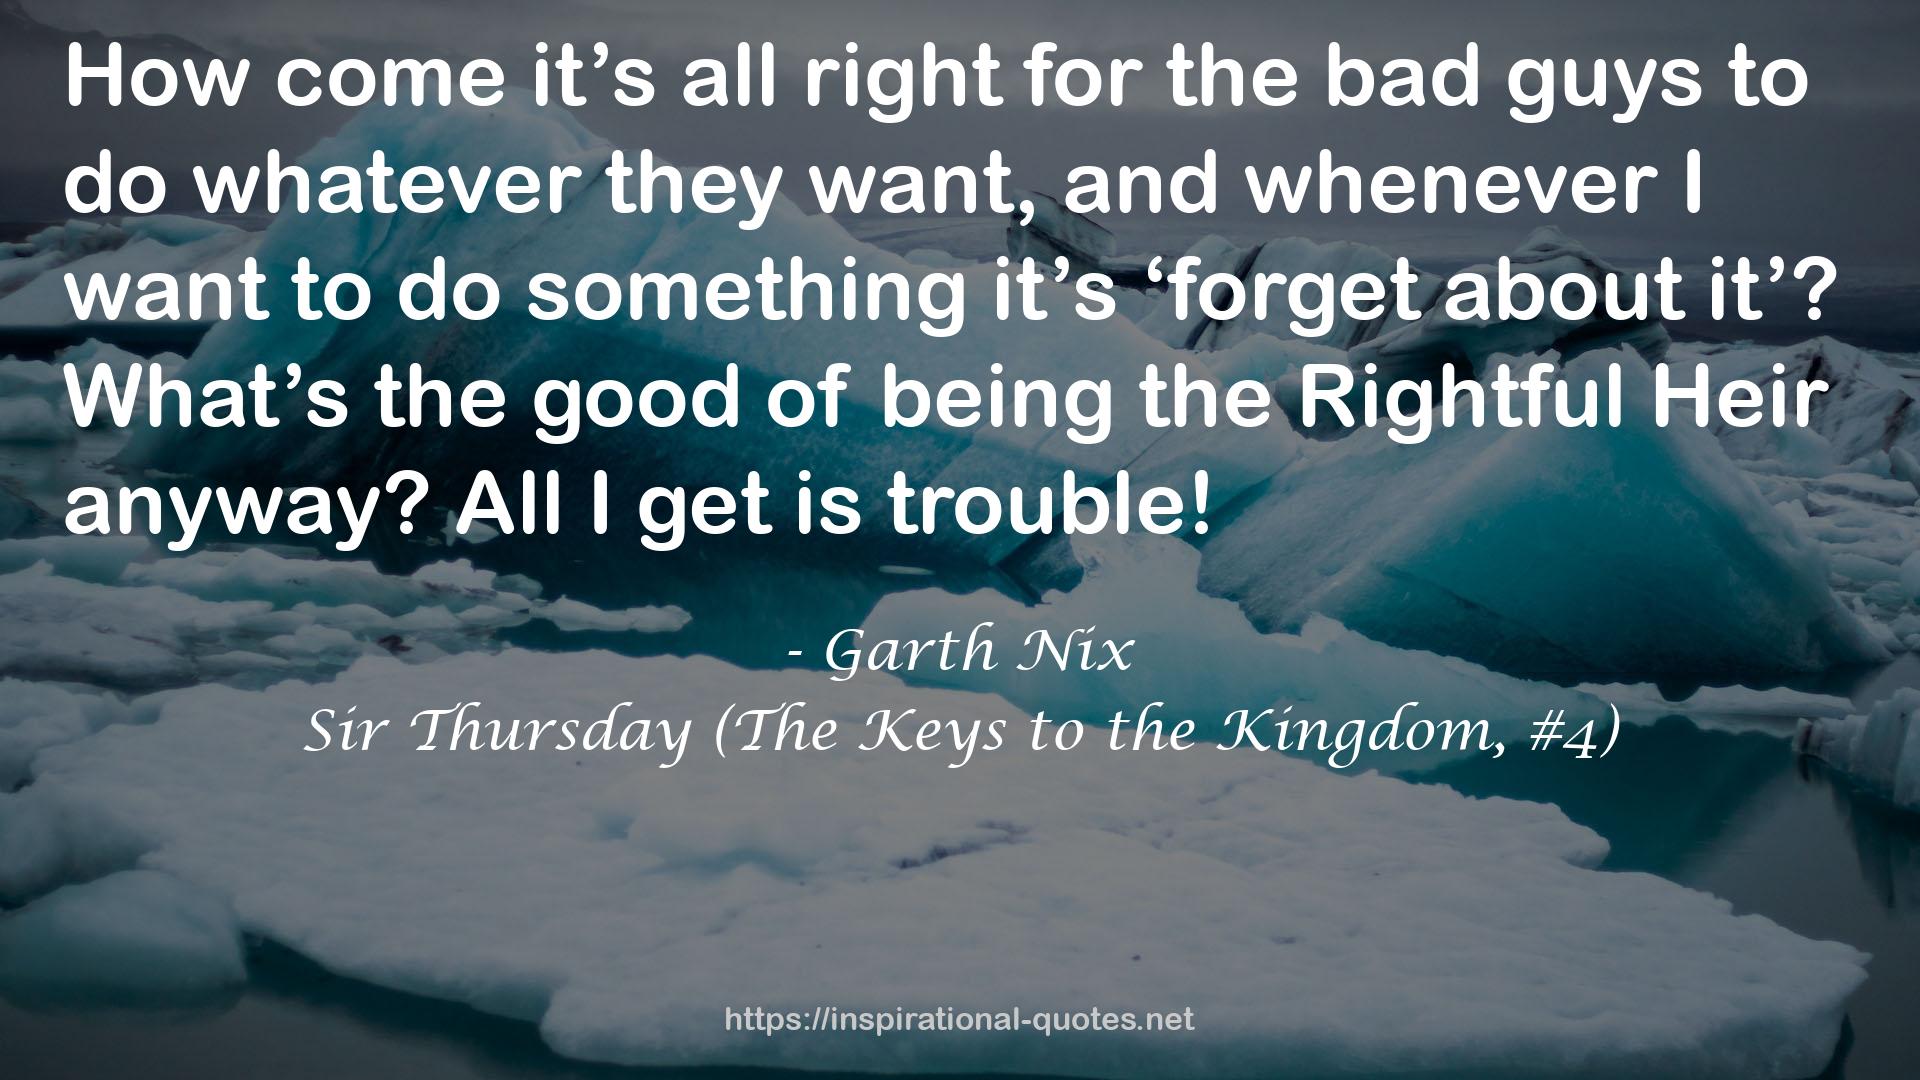 Sir Thursday (The Keys to the Kingdom, #4) QUOTES